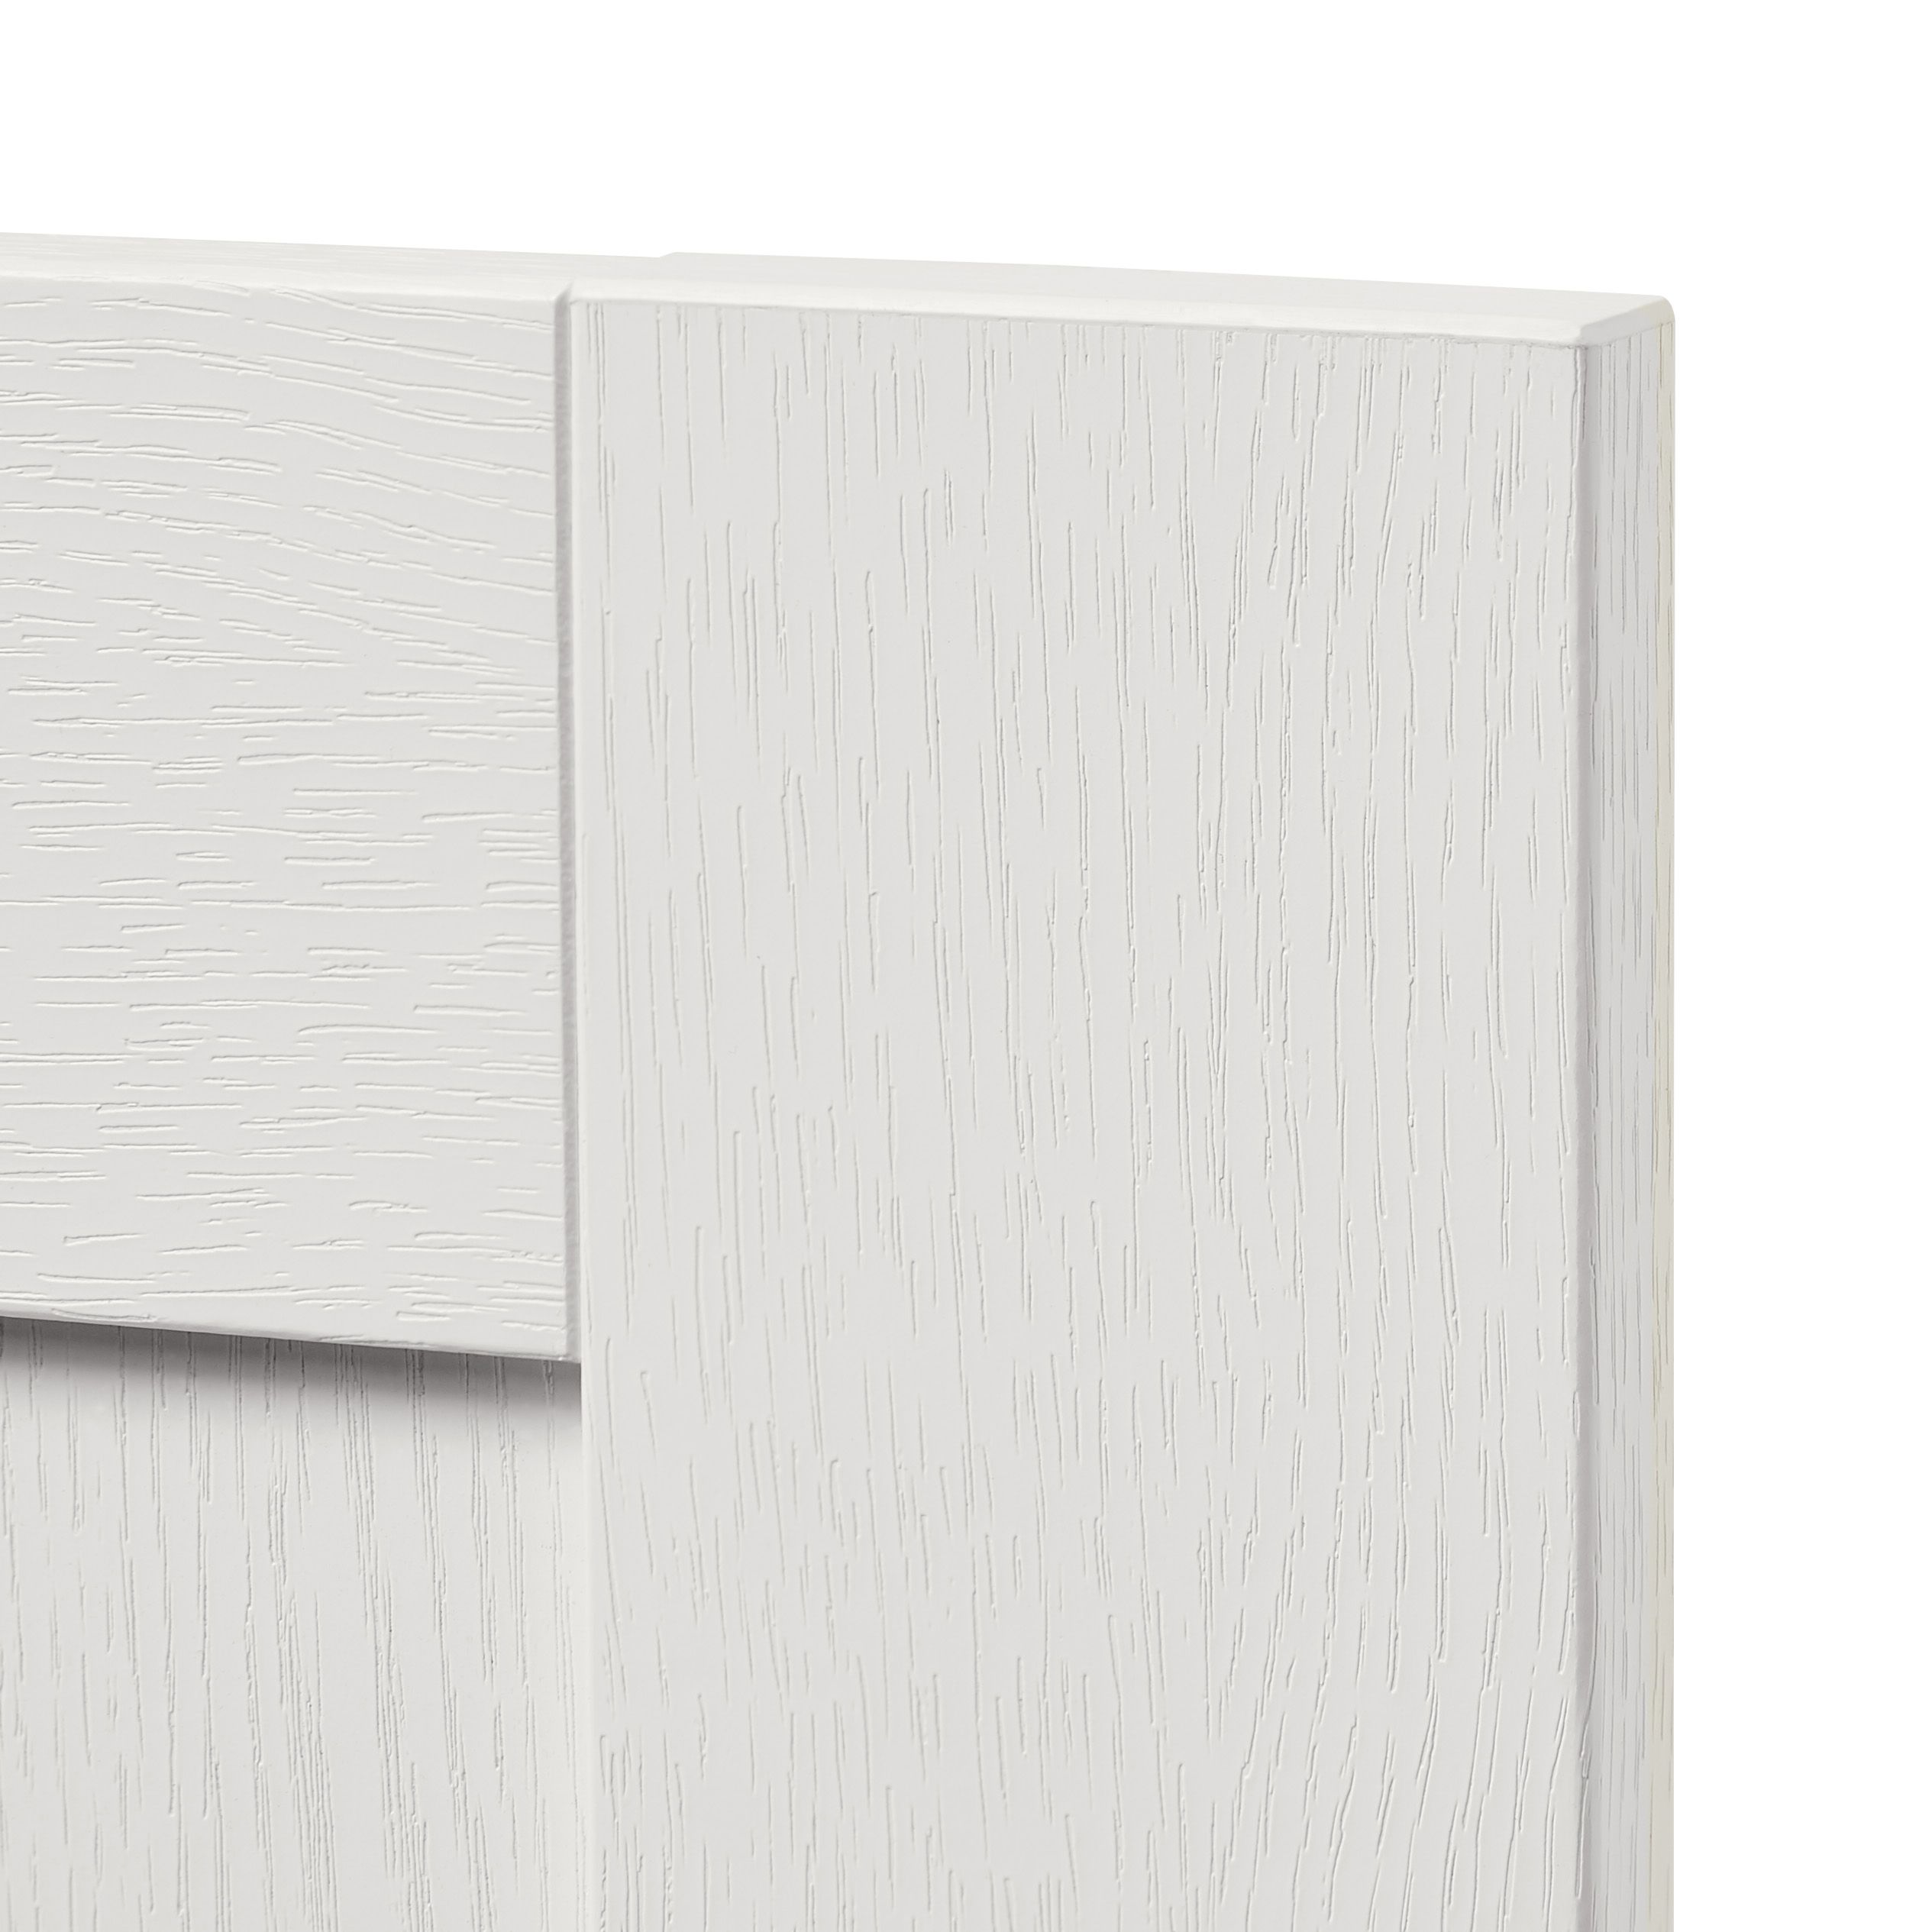 GoodHome Alpinia Matt ivory painted wood effect shaker Drawer front (W)500mm, Pack of 4